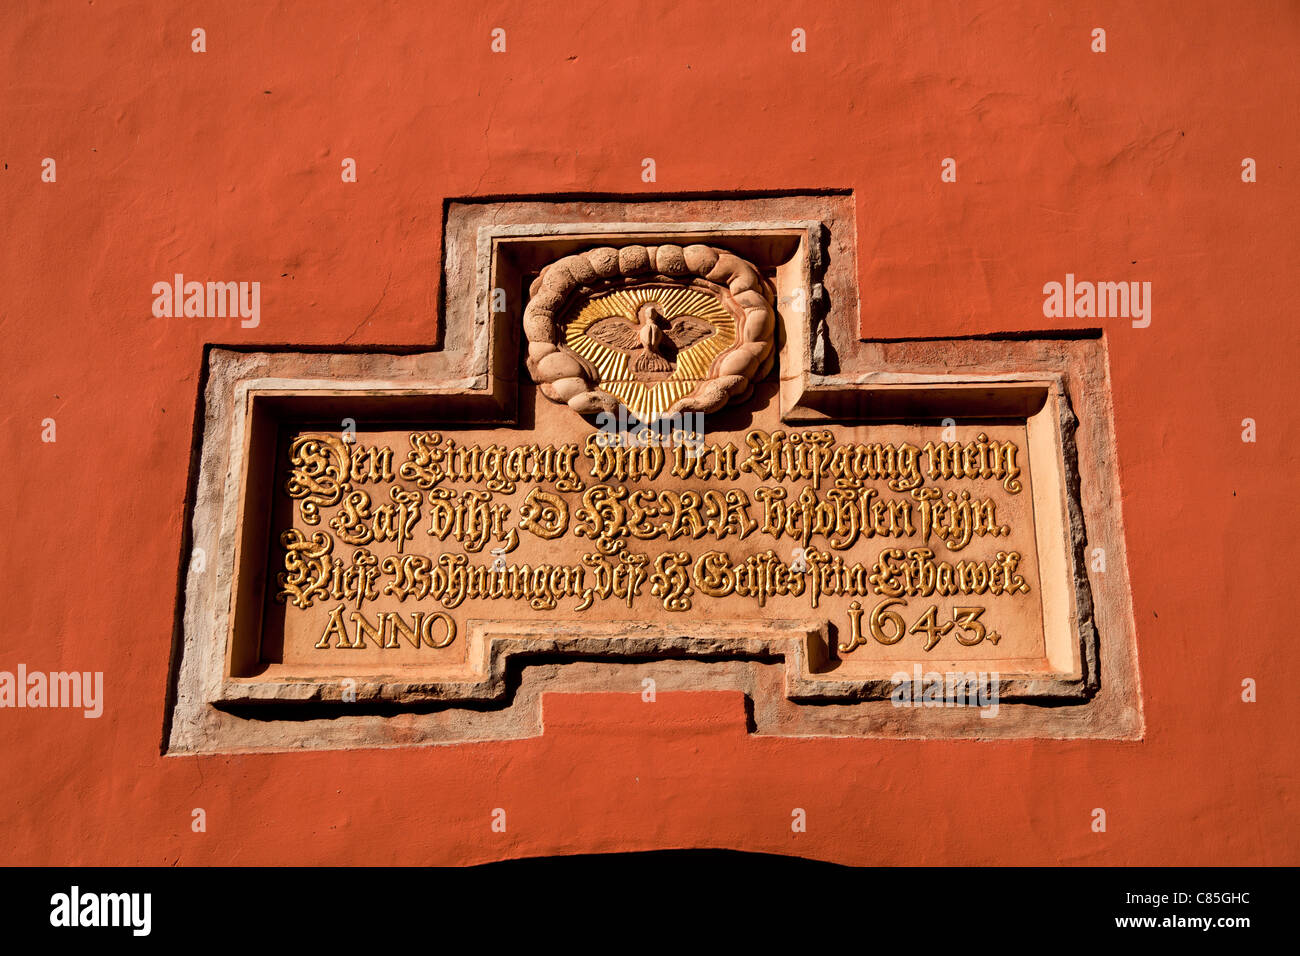 historic inscription from 1643 at the Heilgeisthospital, Hanseatic City of Stralsund, Mecklenburg-Vorpommern, Germany Stock Photo